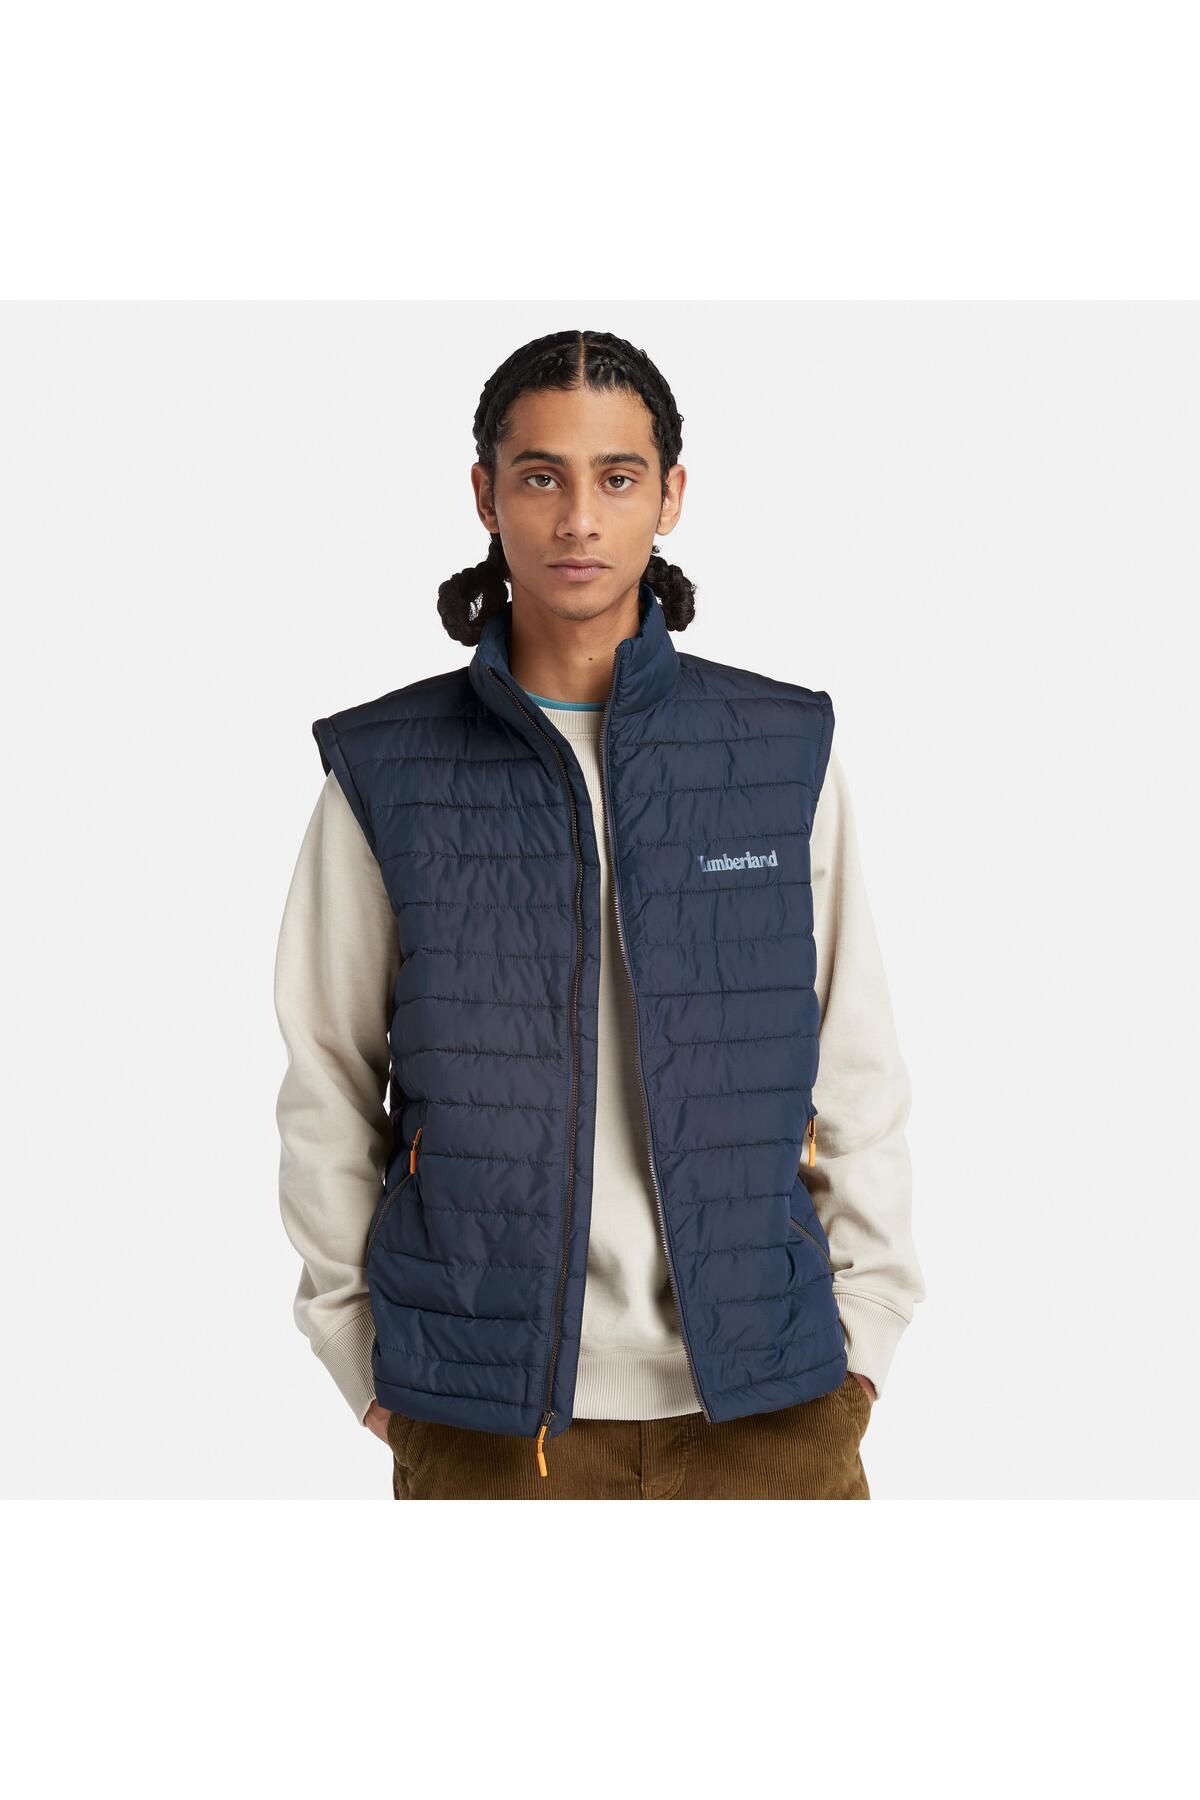 Timberland TİMBERLAND Durable Water Repellent Vest TB0A5XR54331